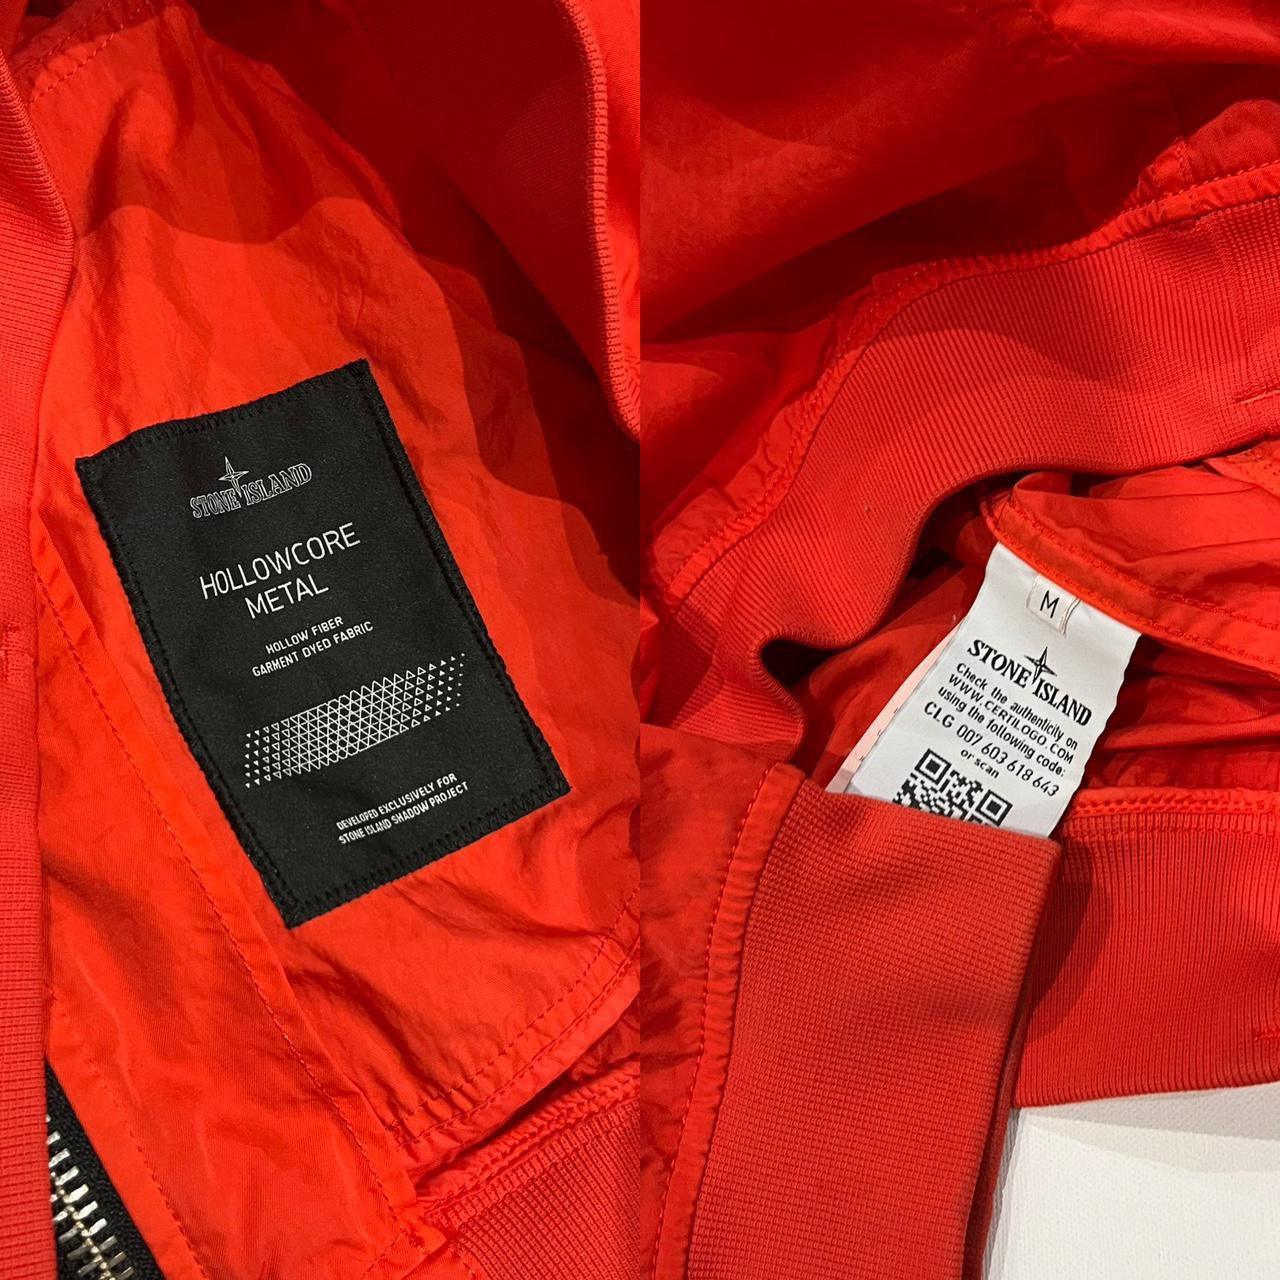 Stone Island Shadow Project Hollowcore jacket - Known Source